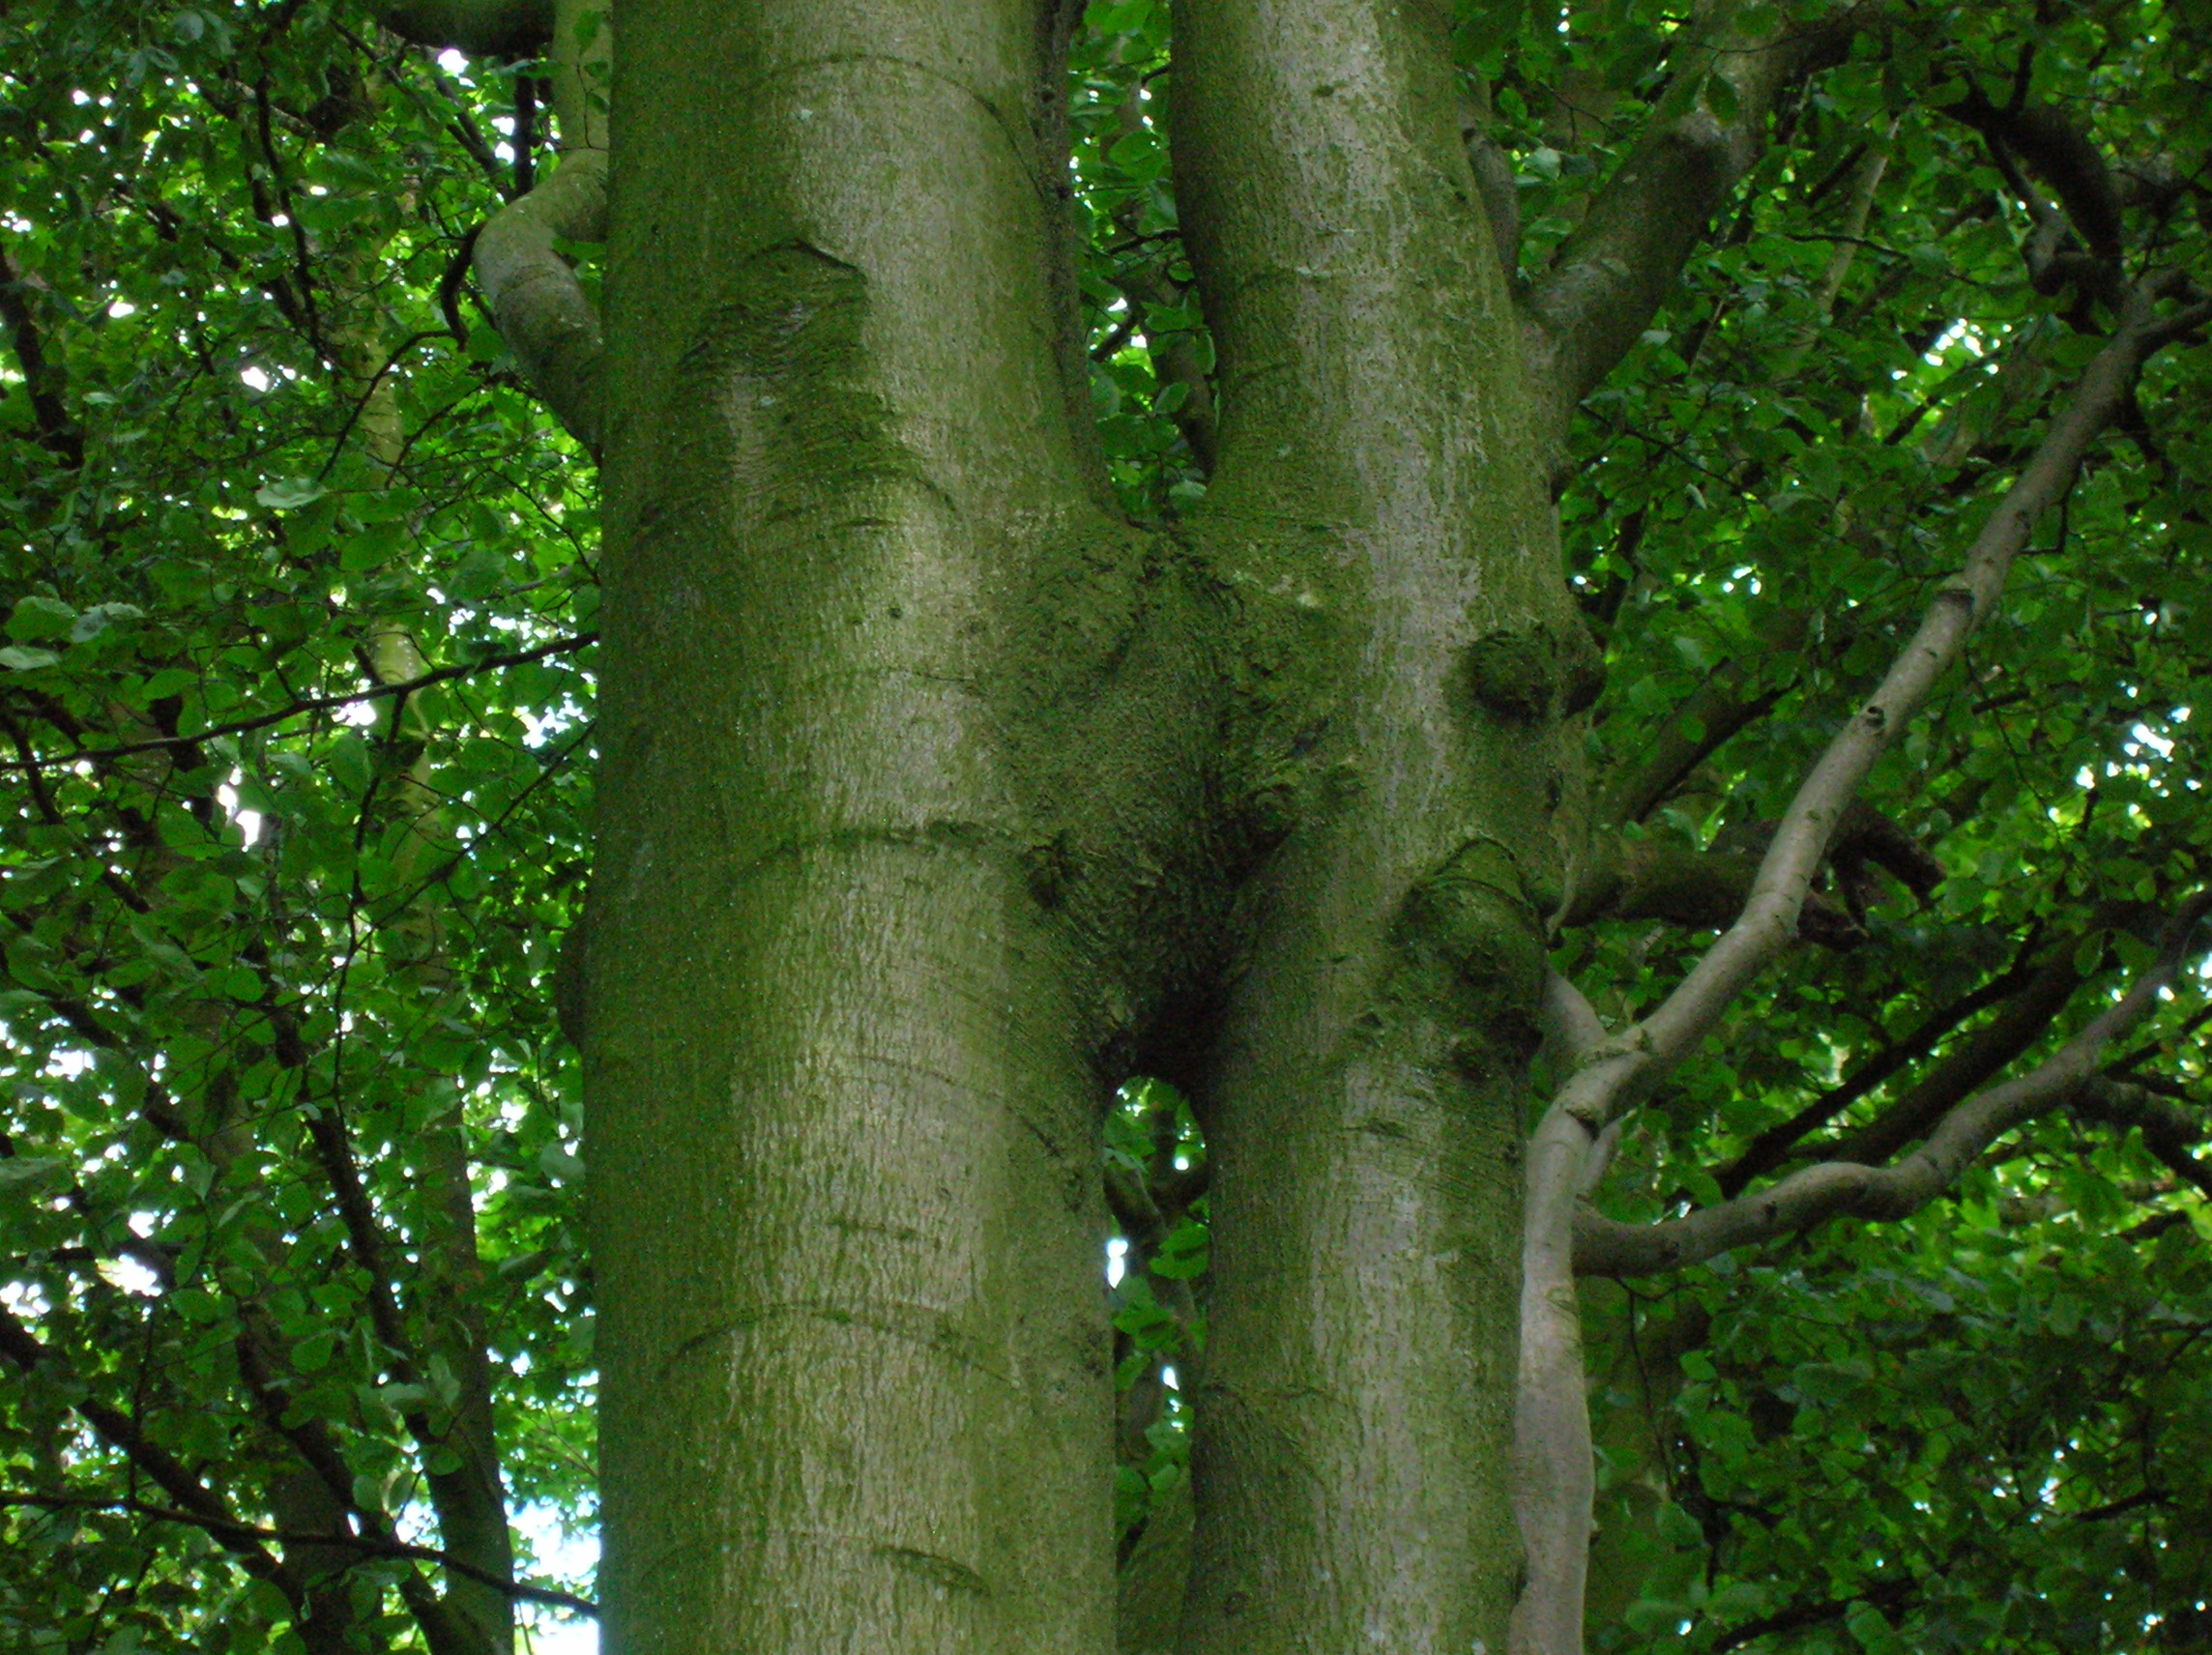 Inosculation or cojoining is when two different trees join together. It is uncommon.